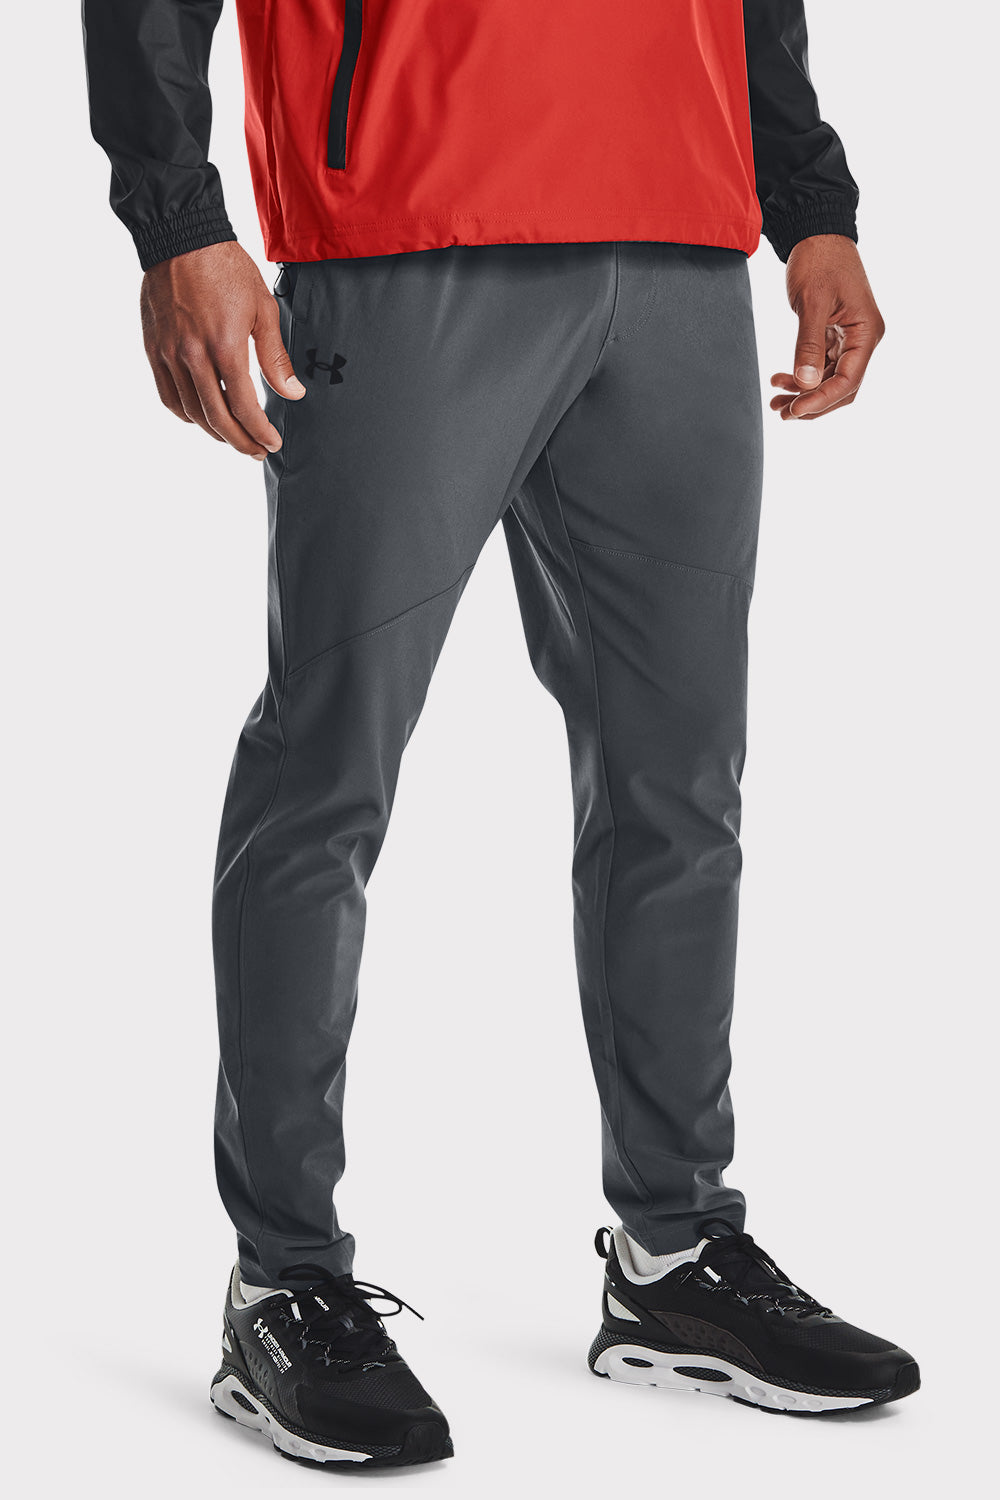 Under Armour UA Stretch Woven Pant - Pitch Gray Grey / MD Byxor